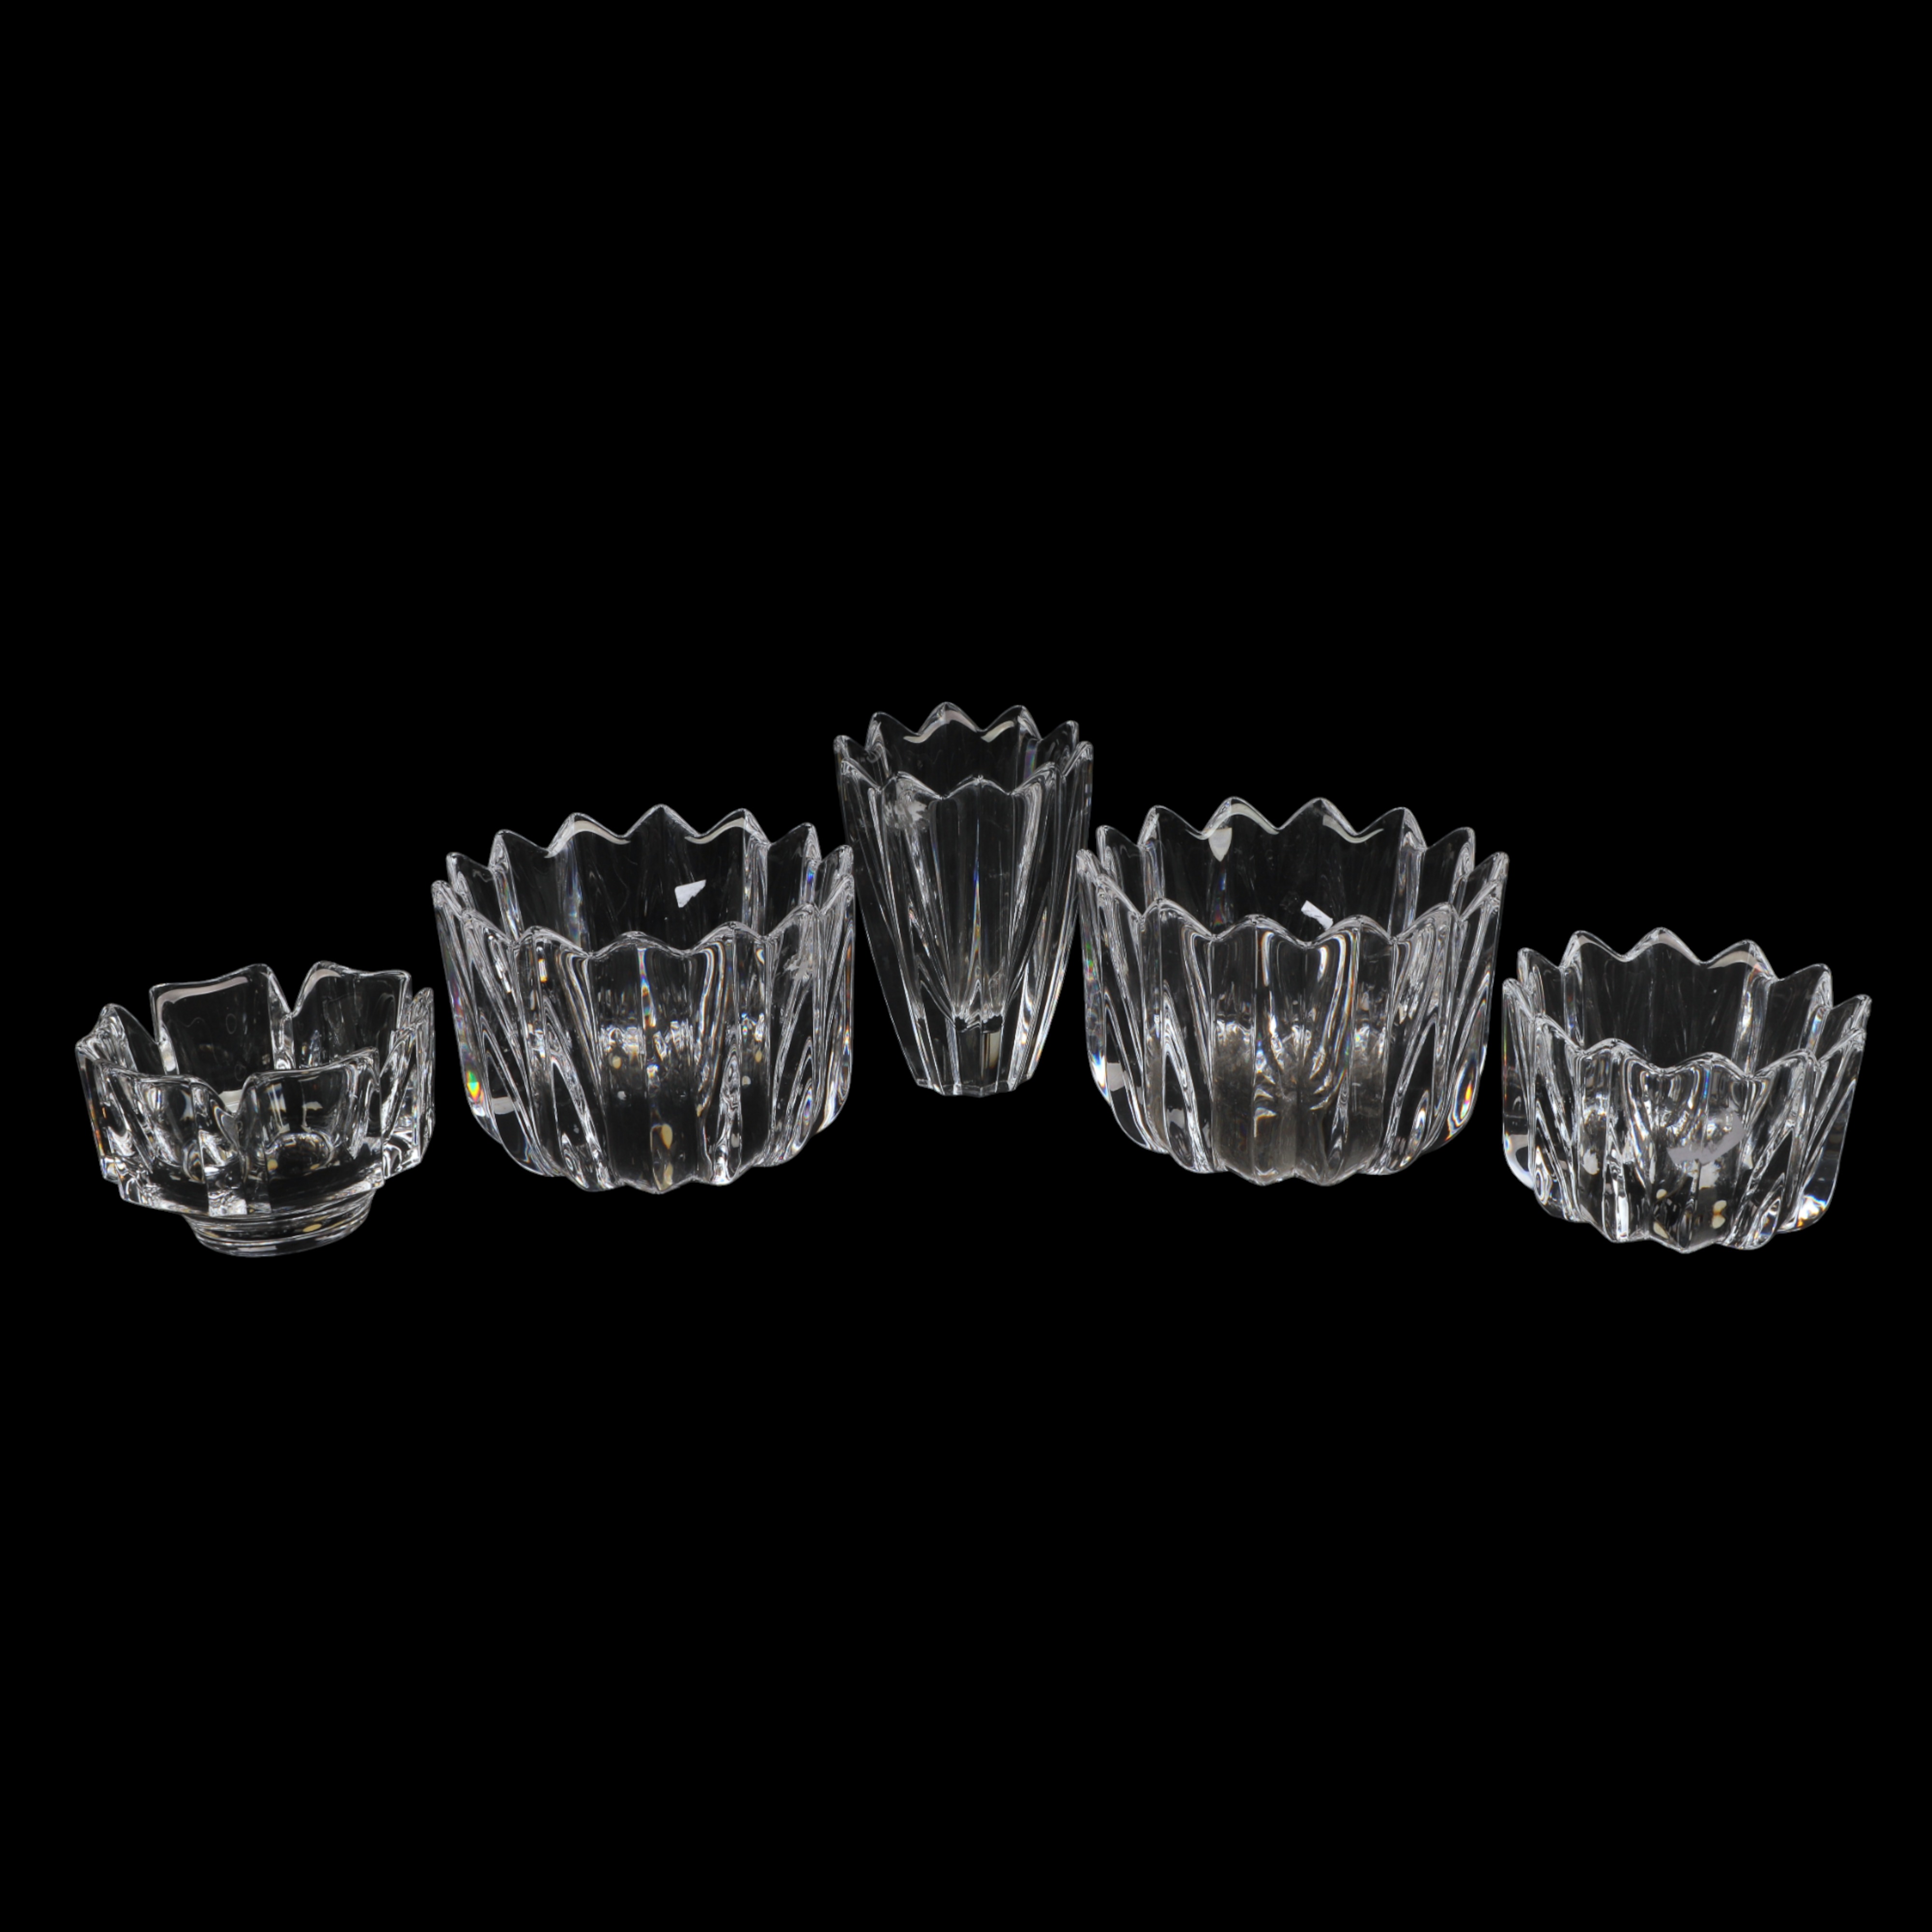  5 Orrefors crystal bowls to include 3ca614